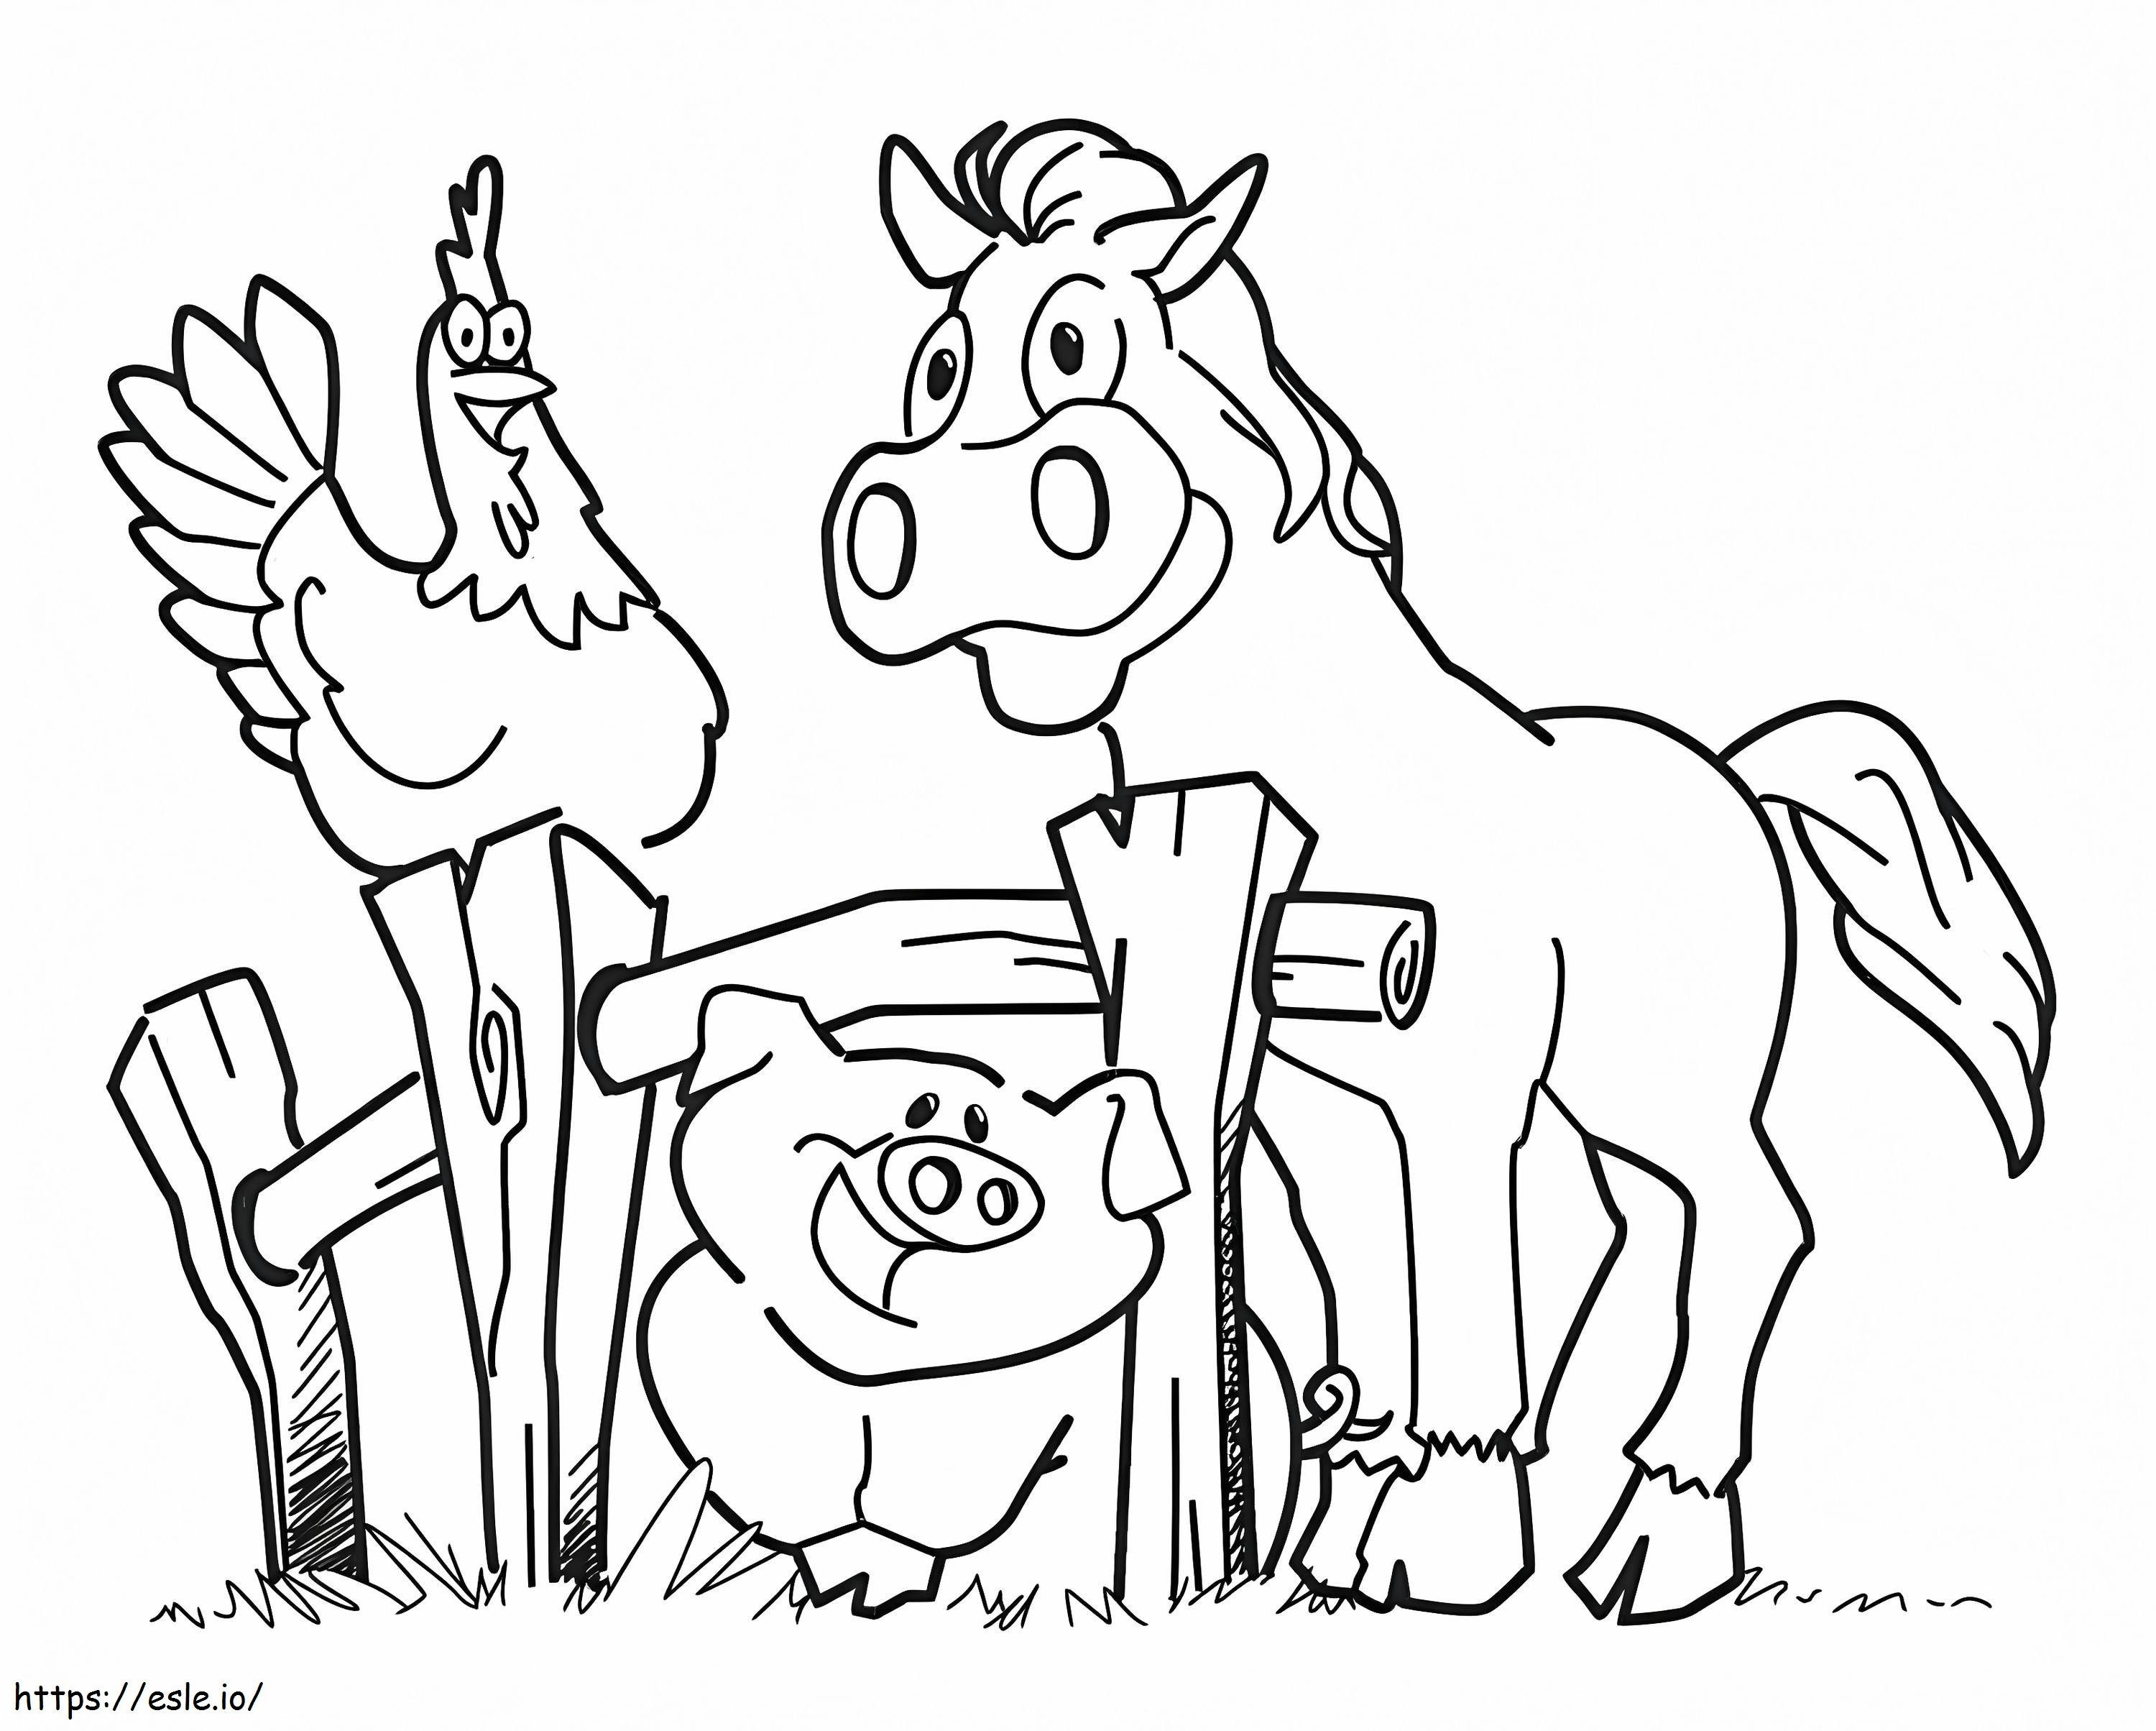 Chicken Horse And Pig On The Farm coloring page